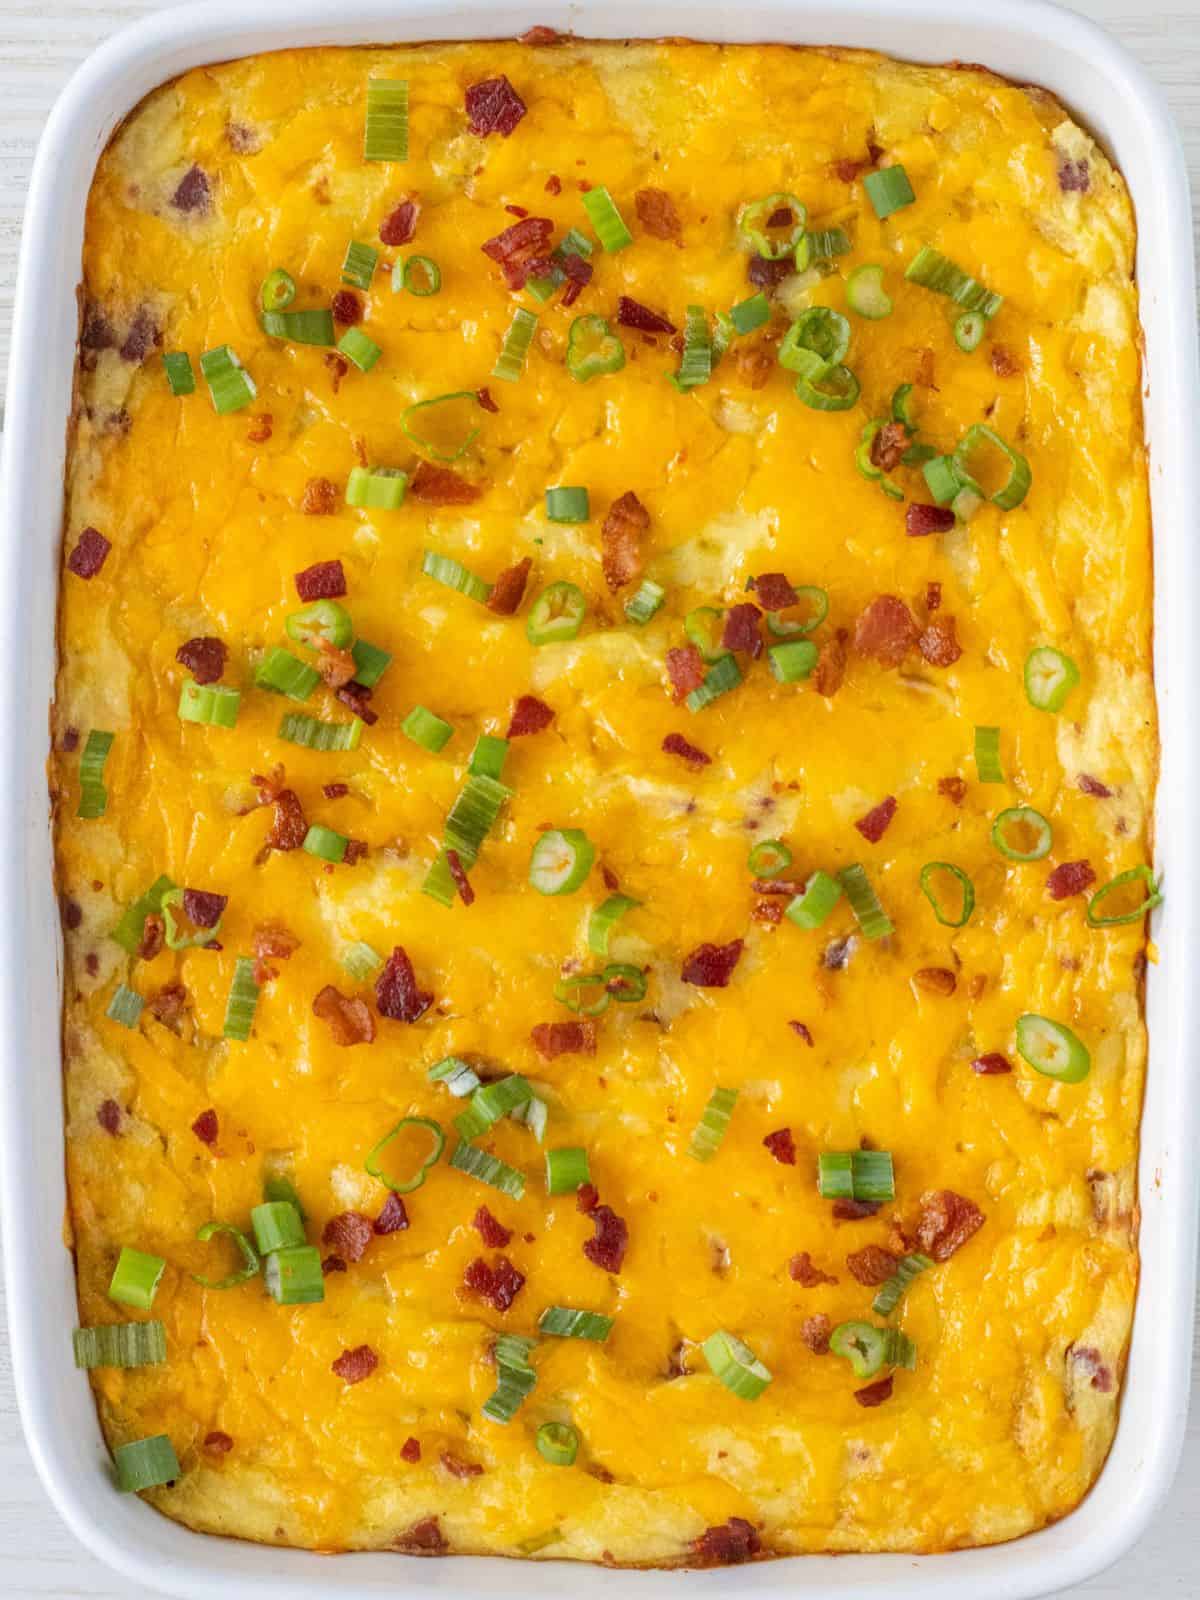 Baked loaded mashed potatoes in a baking dish.